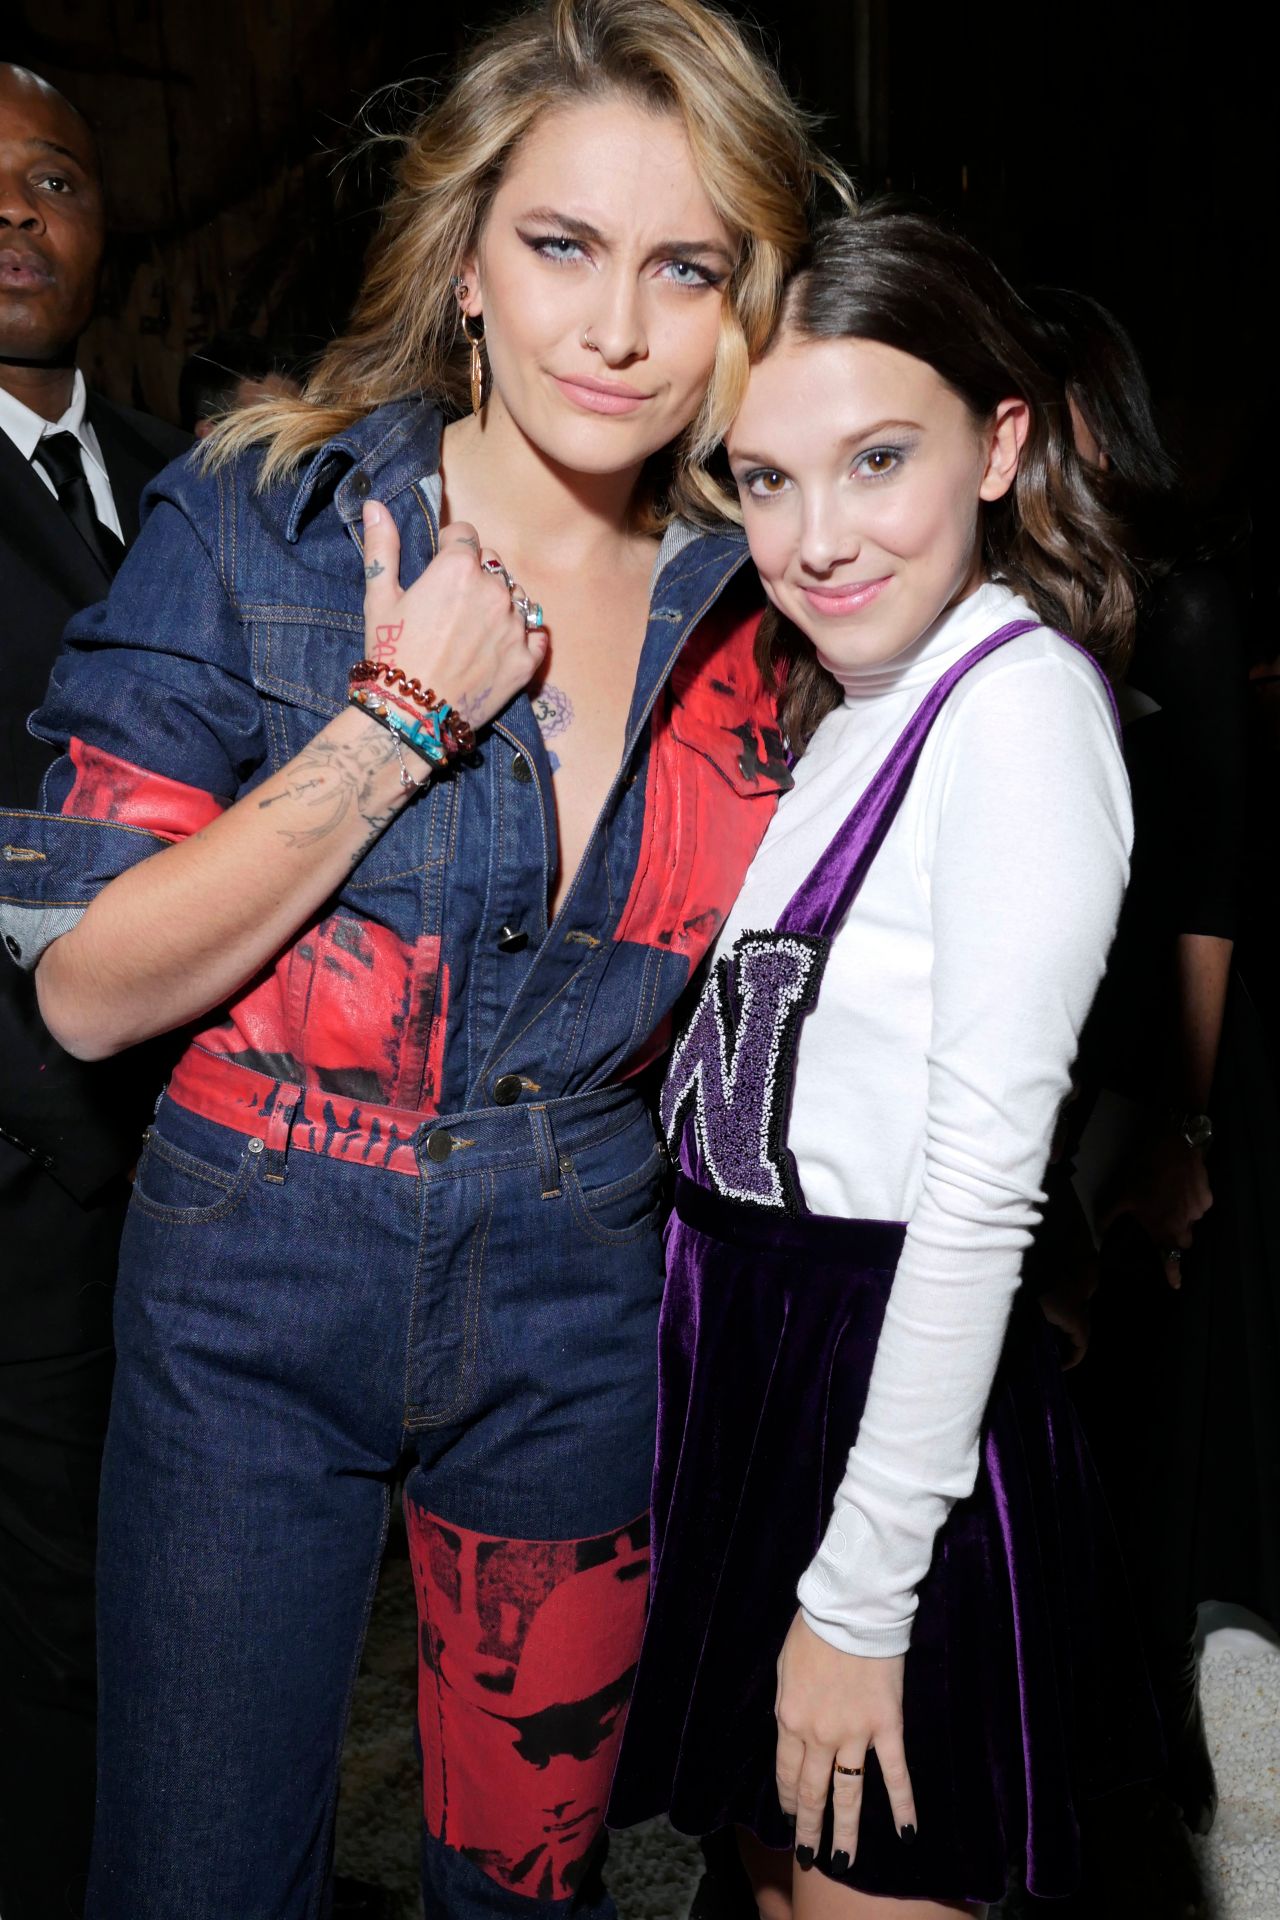 Millie Bobby Brown Fan on X: Photos: 2018 NY Fashion Week (Calvin Klein)  Event + Photo Session -- see more photos at 'Millie Bobby Brown' (a  fansite):  #MillieBobbyBrown @milliebbrown  @Milliestopshate #strangerthings